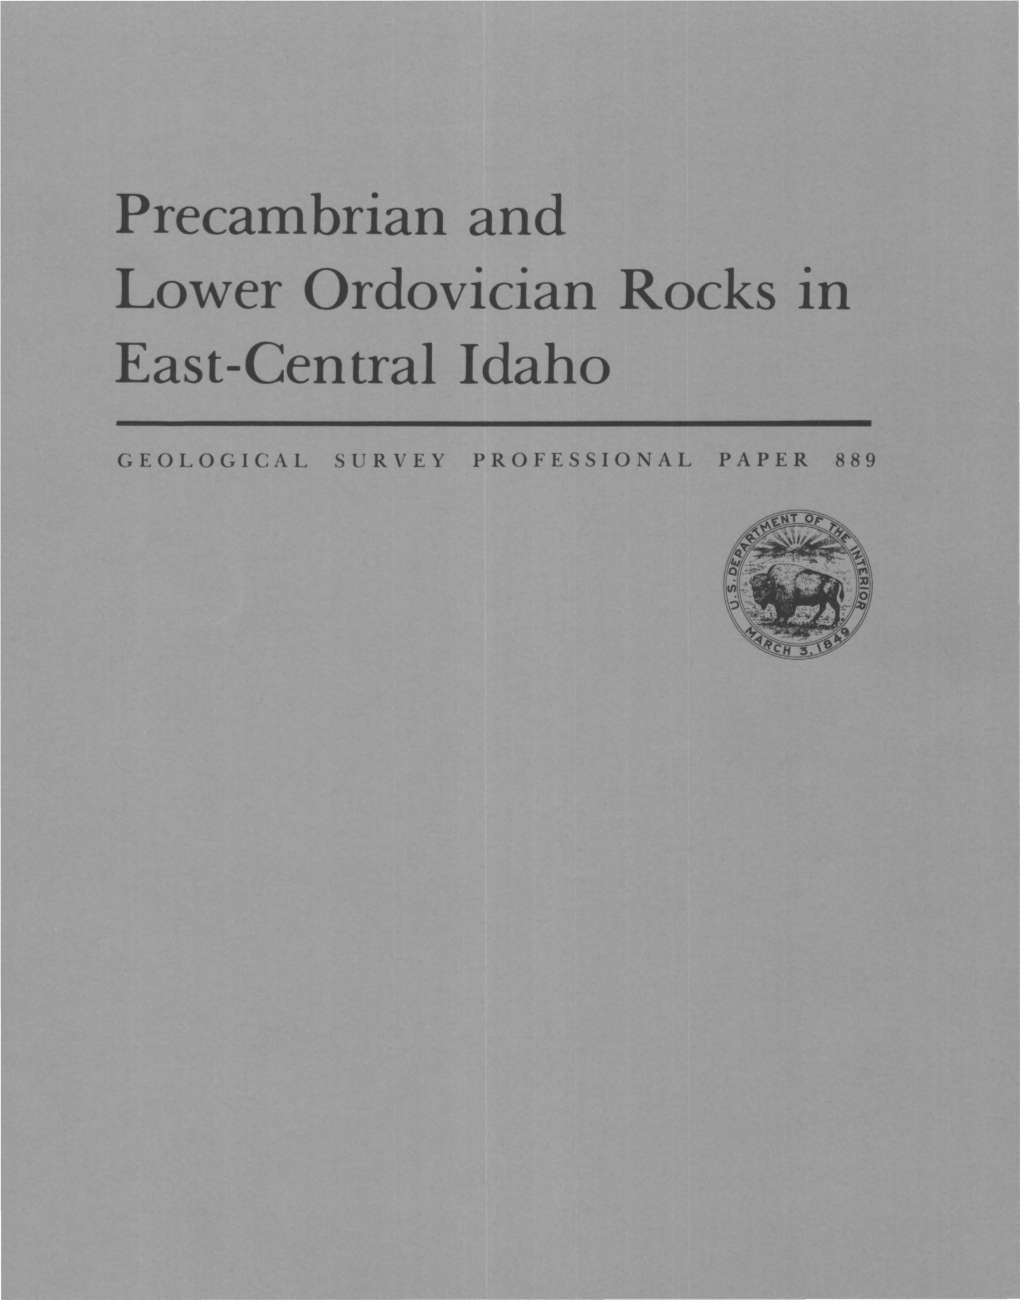 Precambrian and Lower Ordovician Rocks in East-Central Idaho